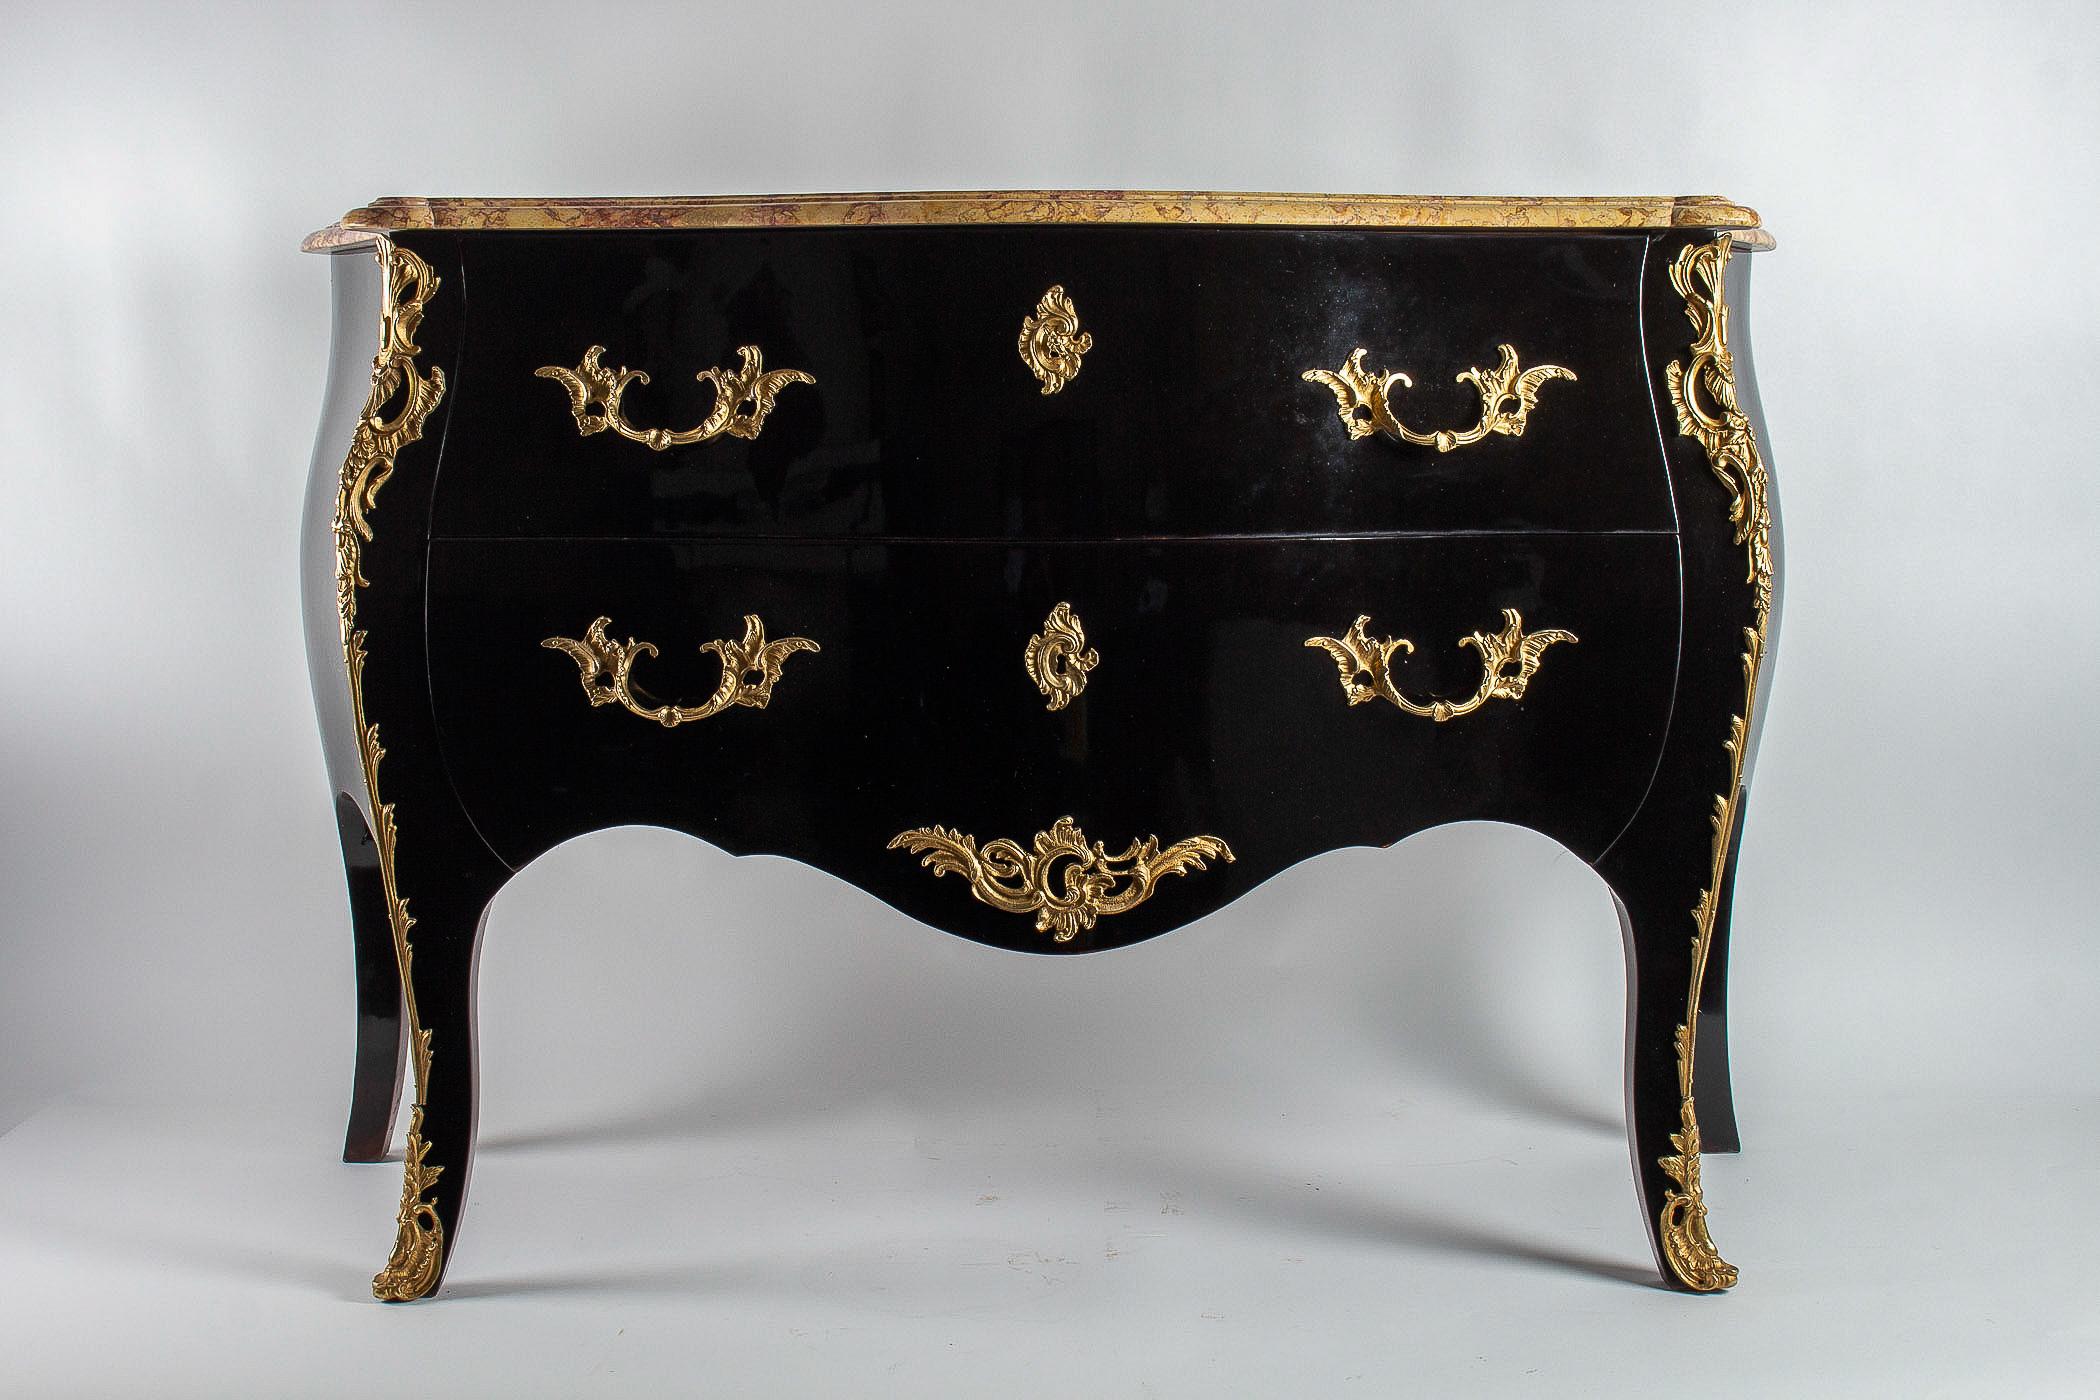 Manner of Jansen French Louis XV style black-lacquered commode, circa 1950

Elegant and decorative serpentine black-lacquered commode called « sauteuse ». Opening by two front drawers. The chest rests in lovely serpentine legs. Beautiful